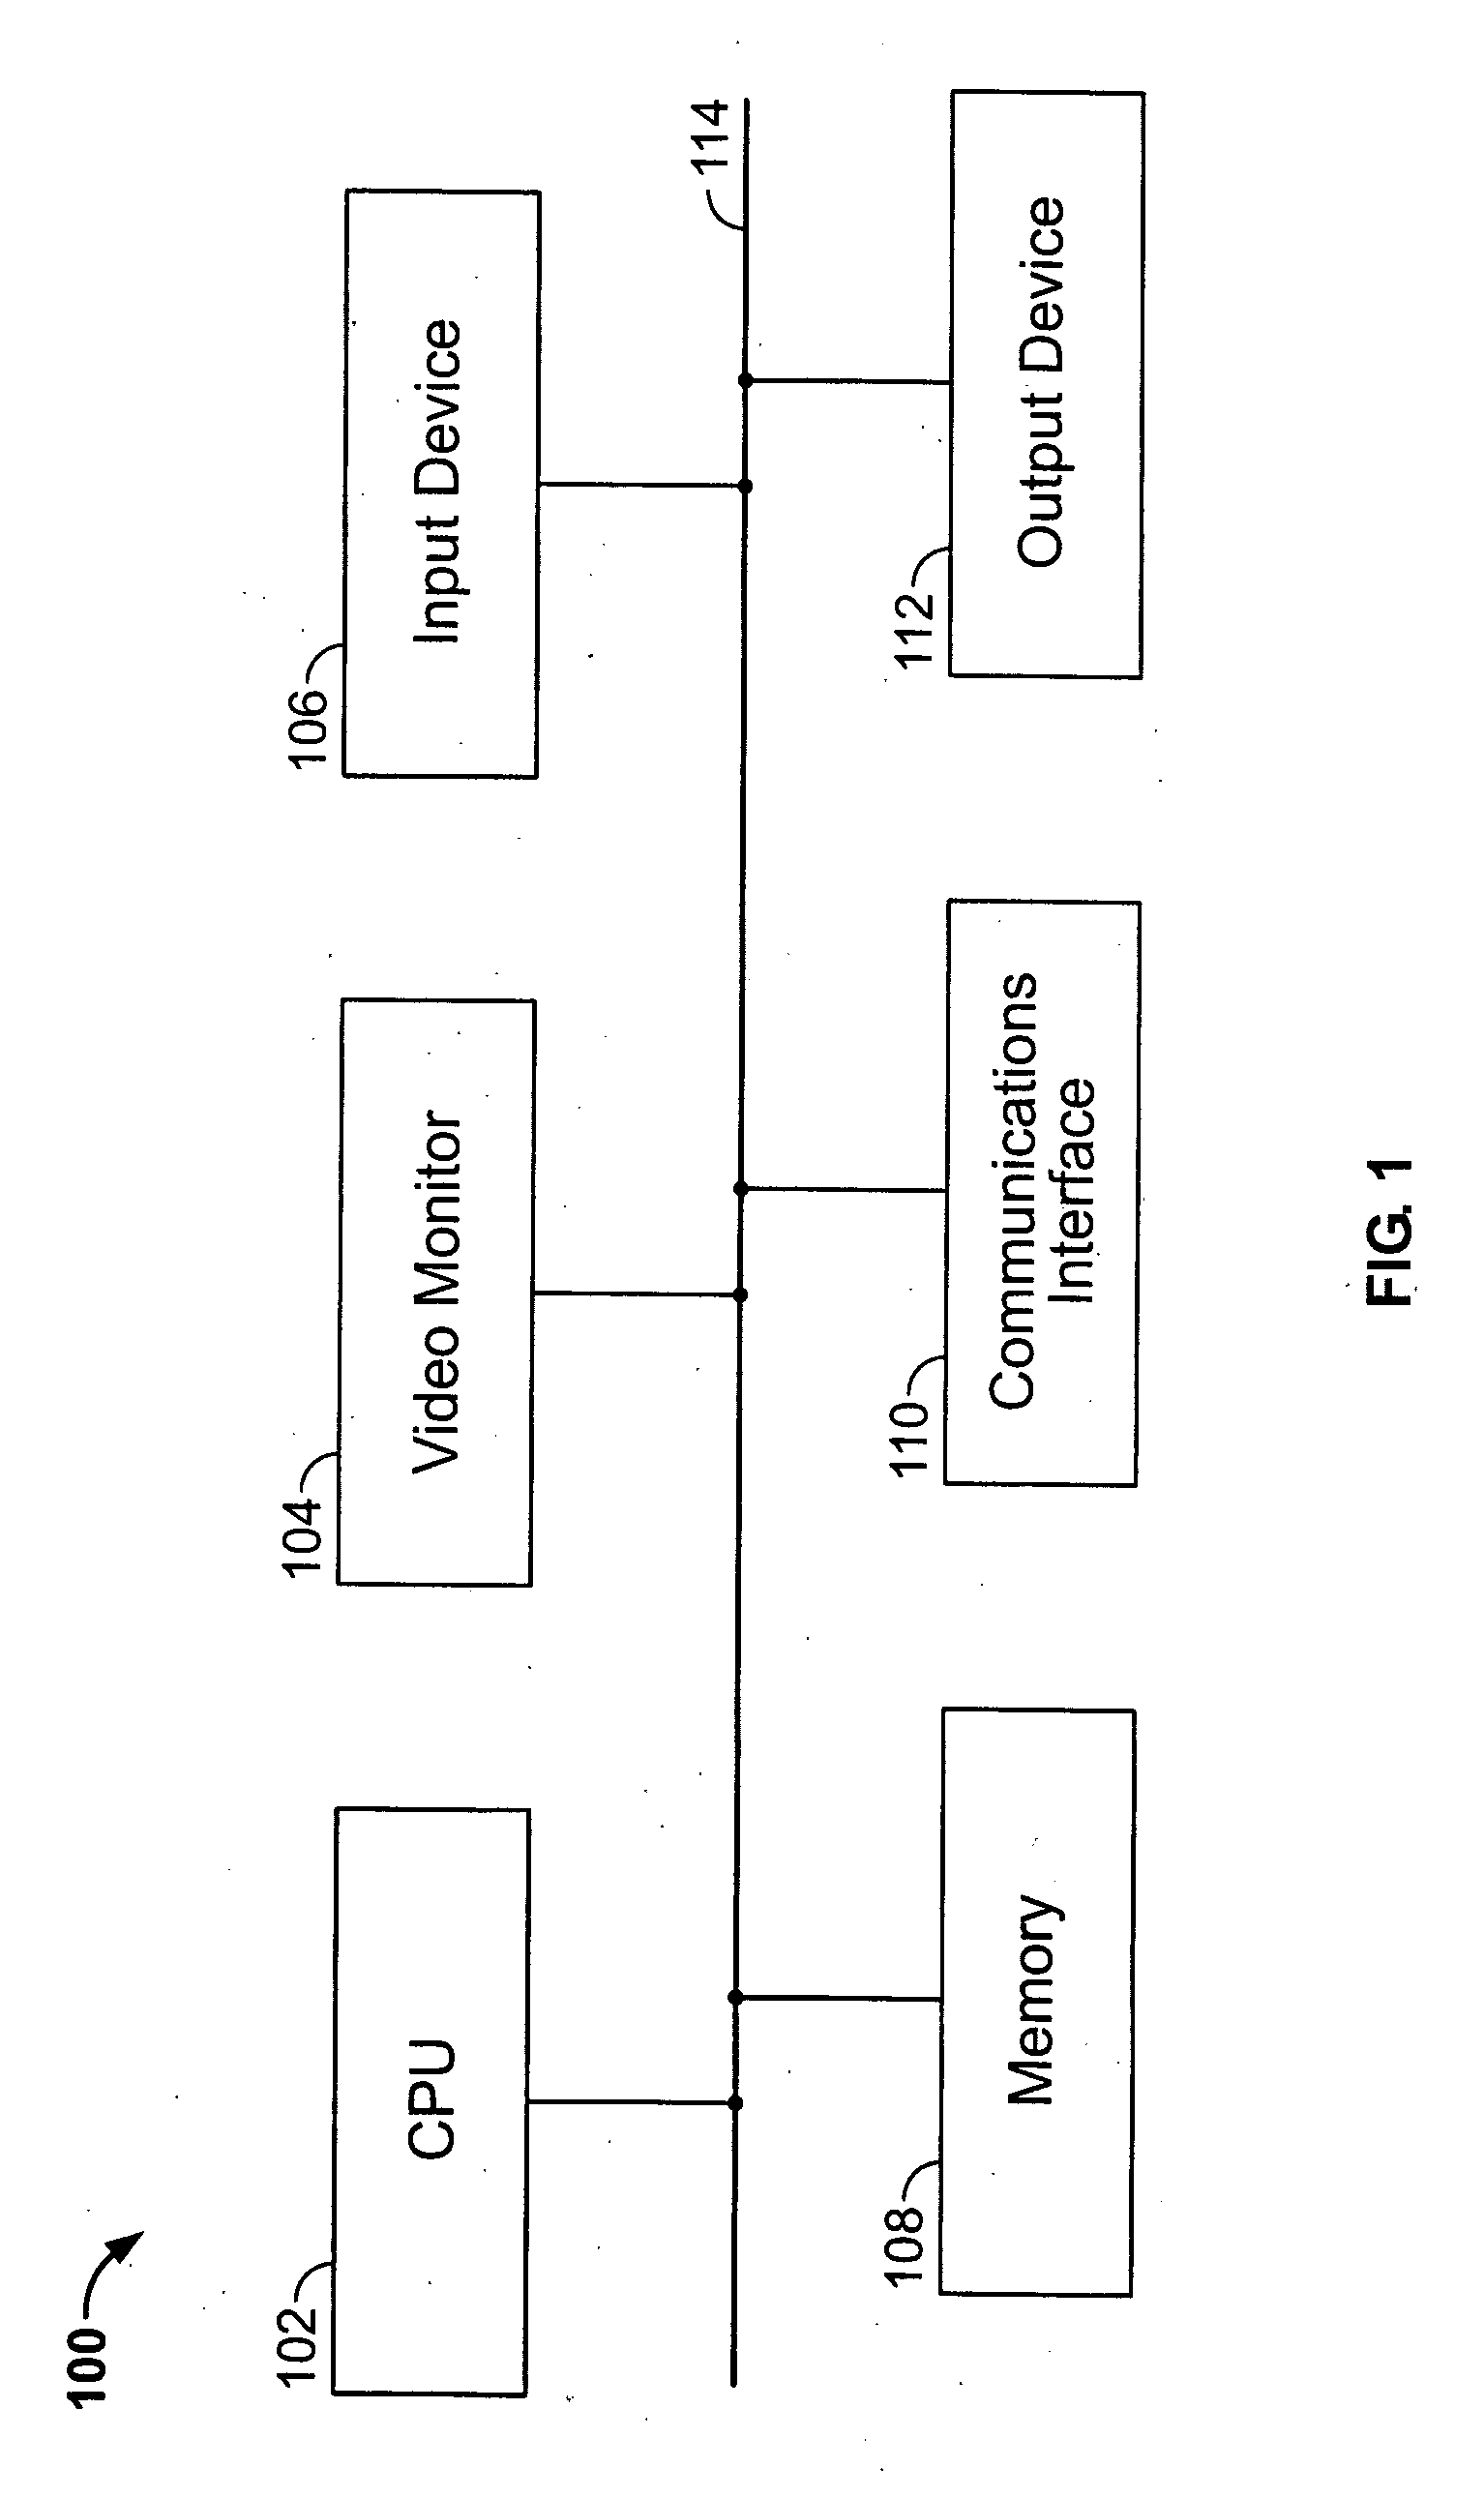 System and method for monitoring physical assets